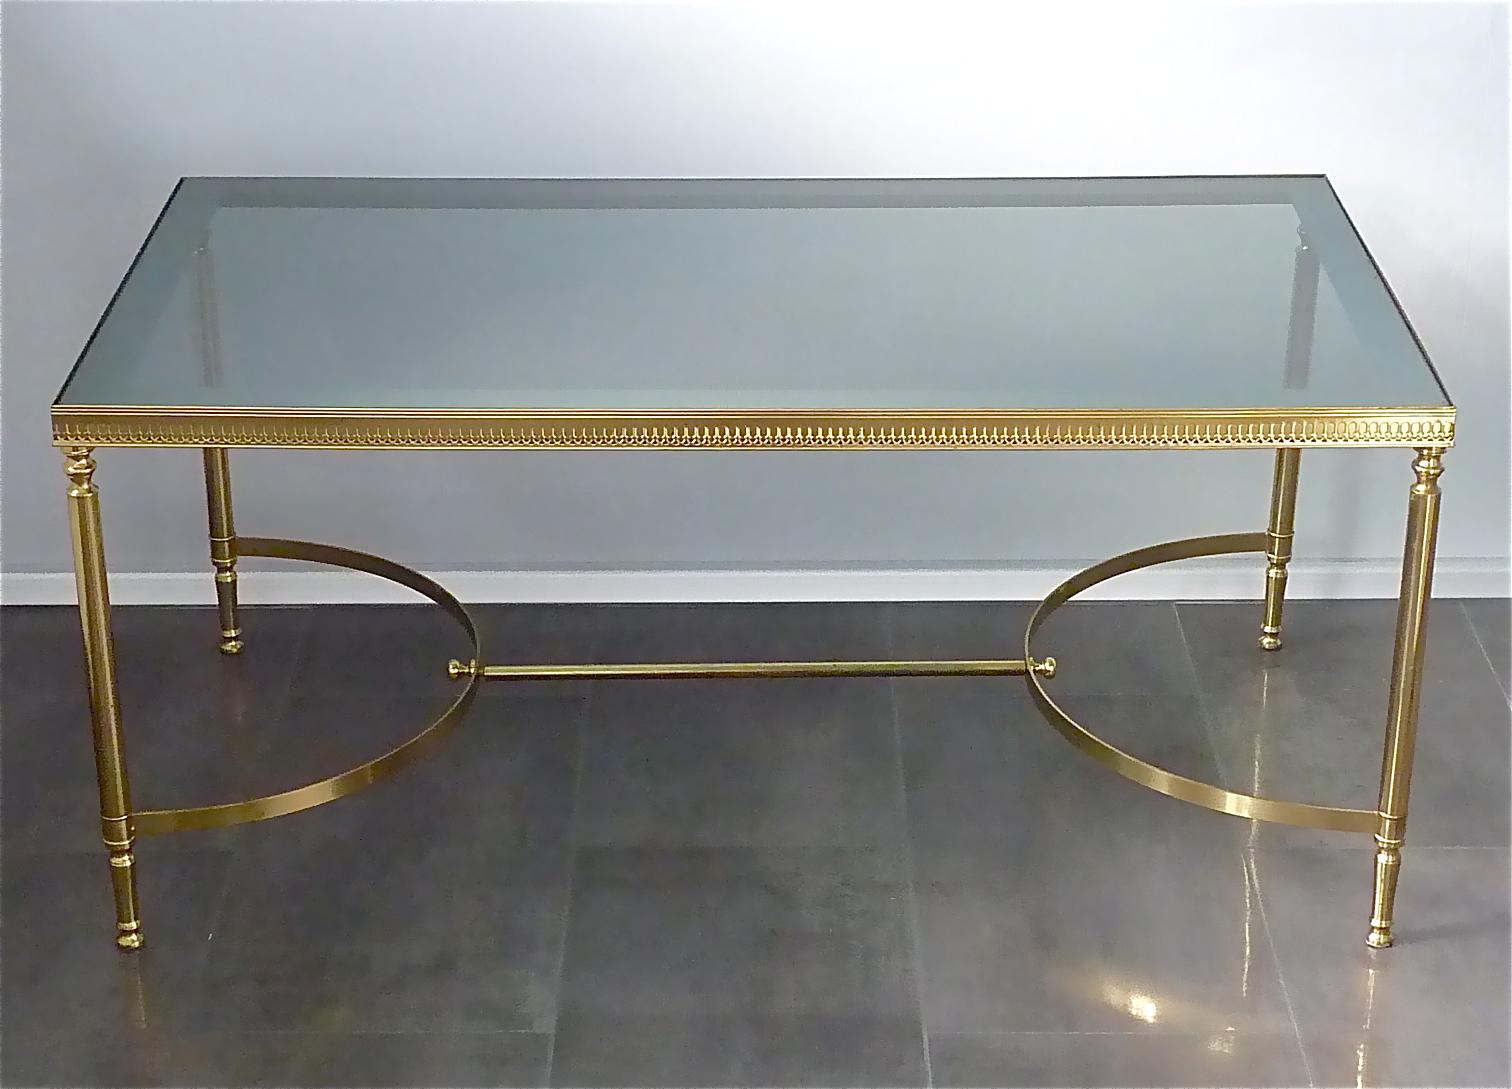 Large elegant French Maison Baguès patinated brass and mirrored glass sofa, couch side or end table, Paris France circa 1950-1960. The high quality table comparable to Maison Jansen and Maison Charles is 50 cm / 19.69 inches tall, 111 cm / 43.70